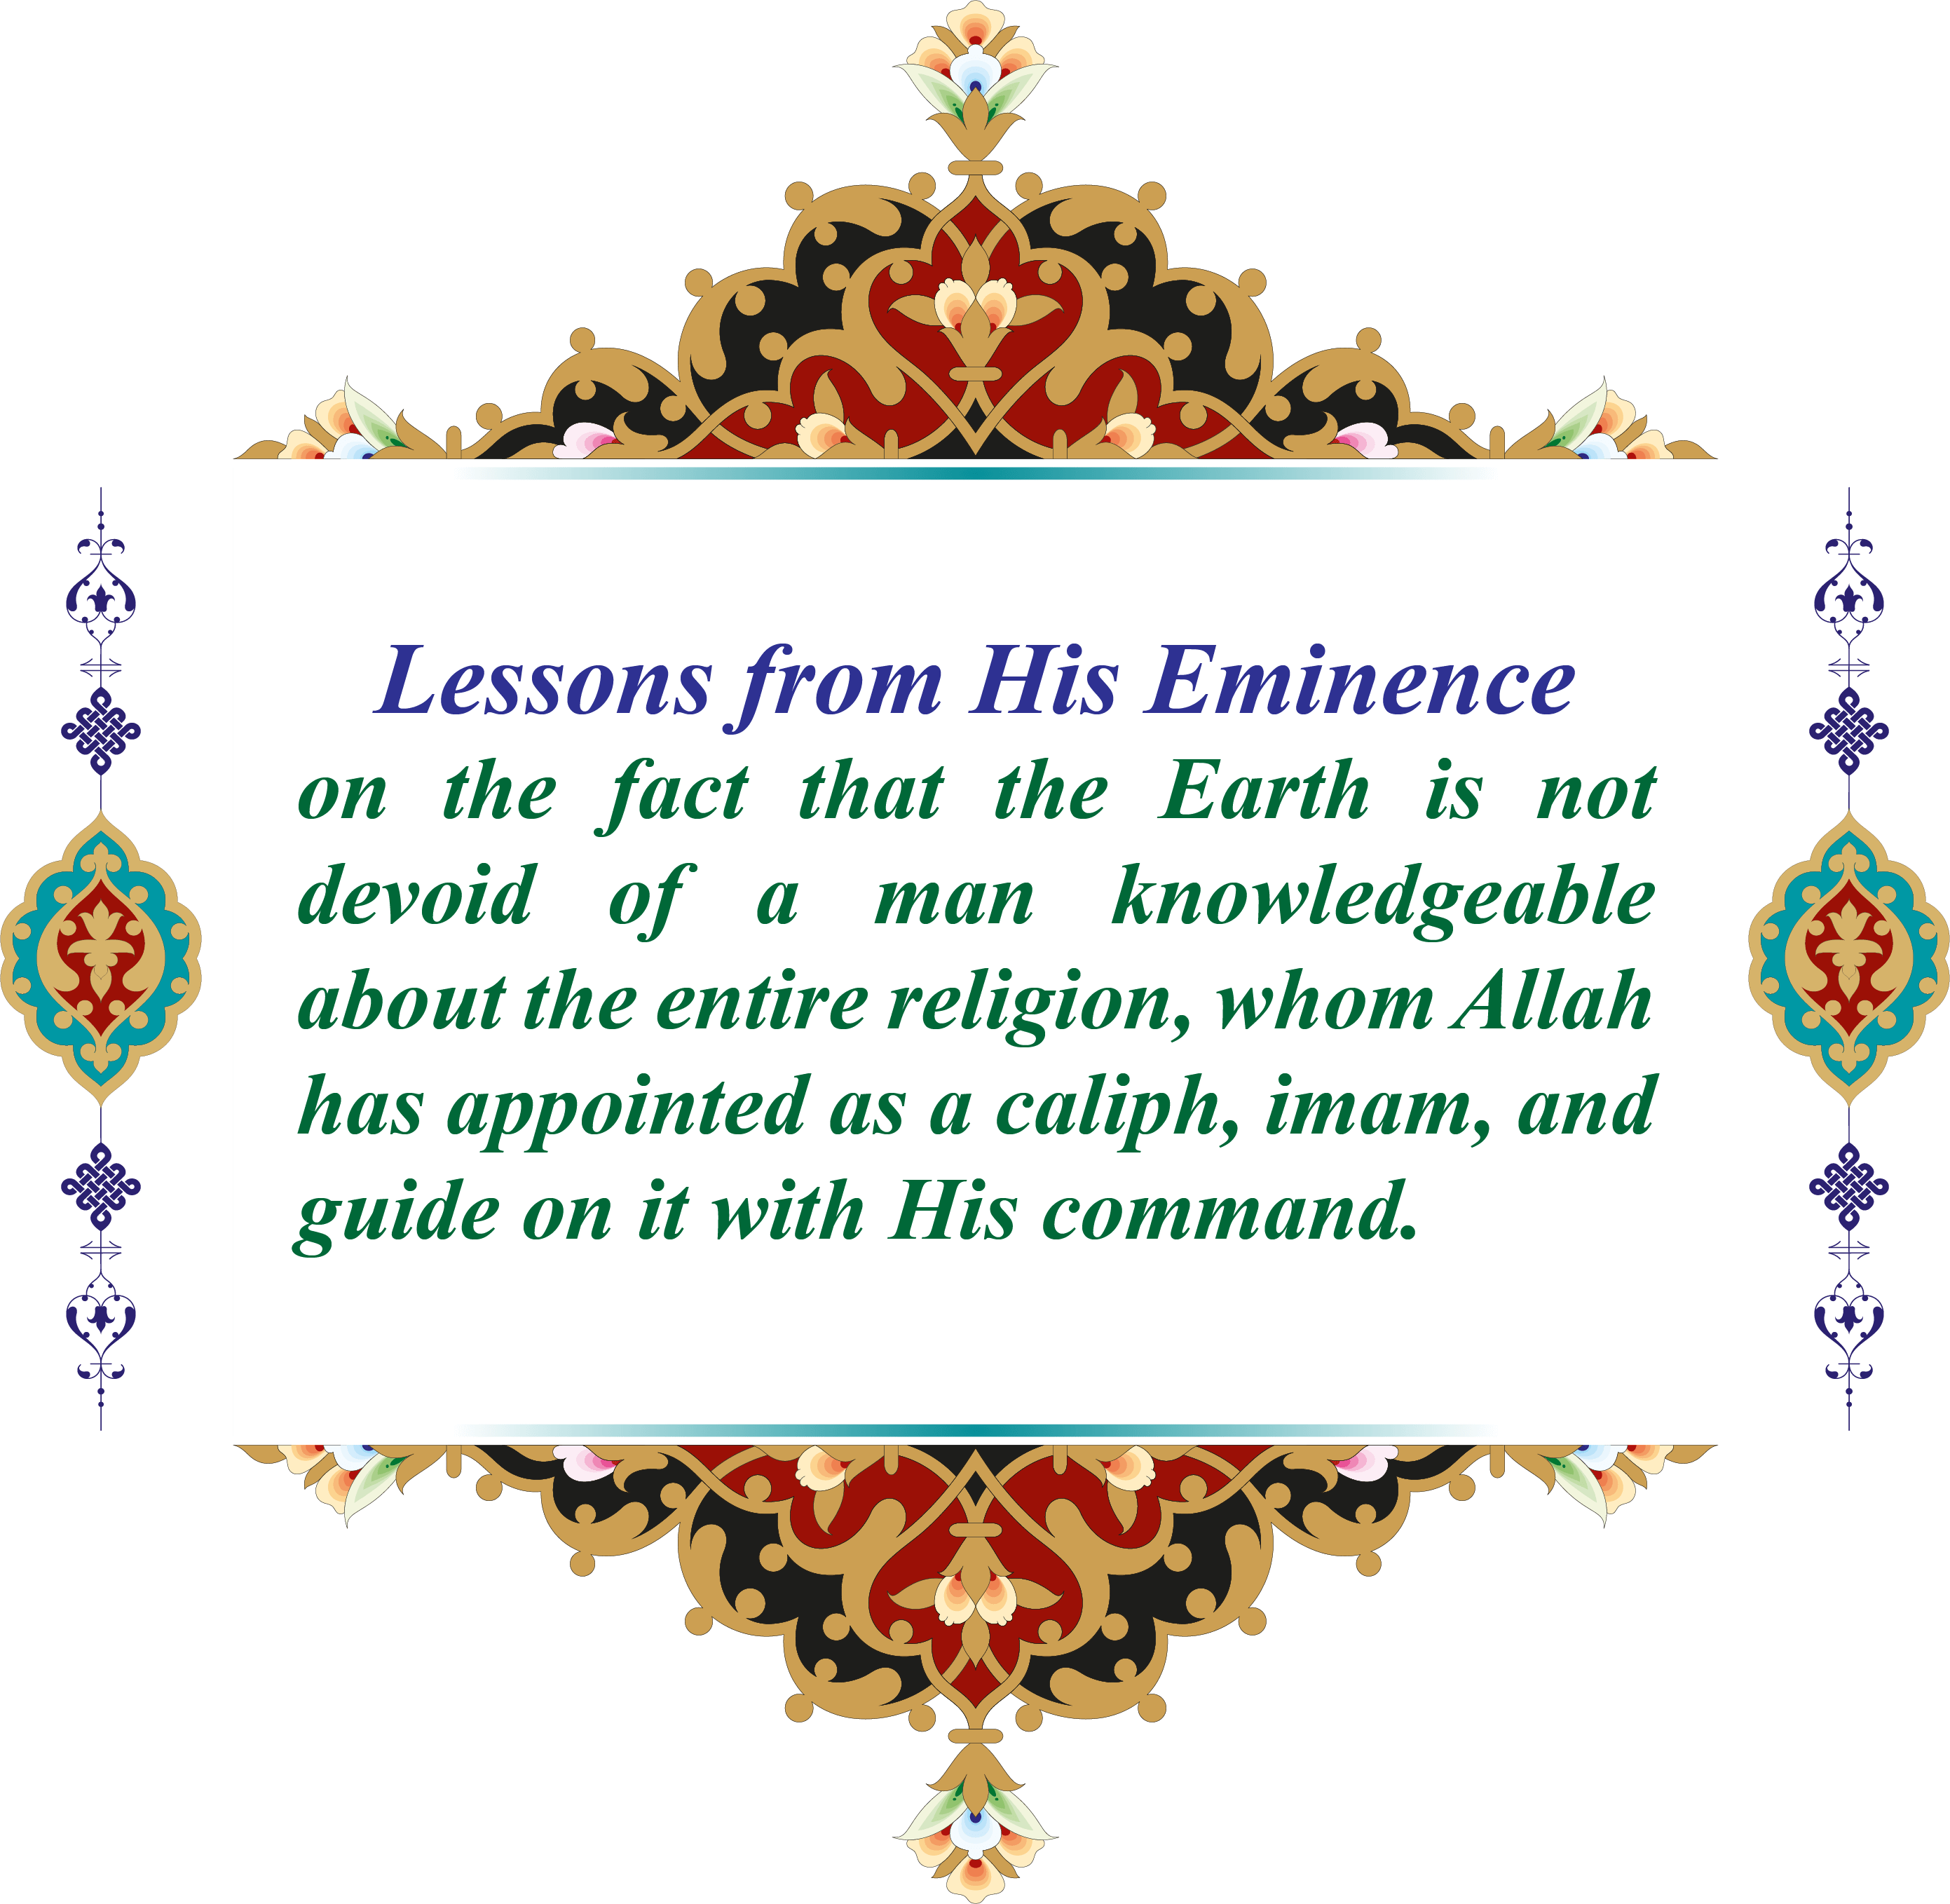 Lessons from His Eminence on the fact that the Earth is not devoid of a man knowledgeable about the entire religion, whom Allah has appointed as a caliph, imam, and guide on it with His command.